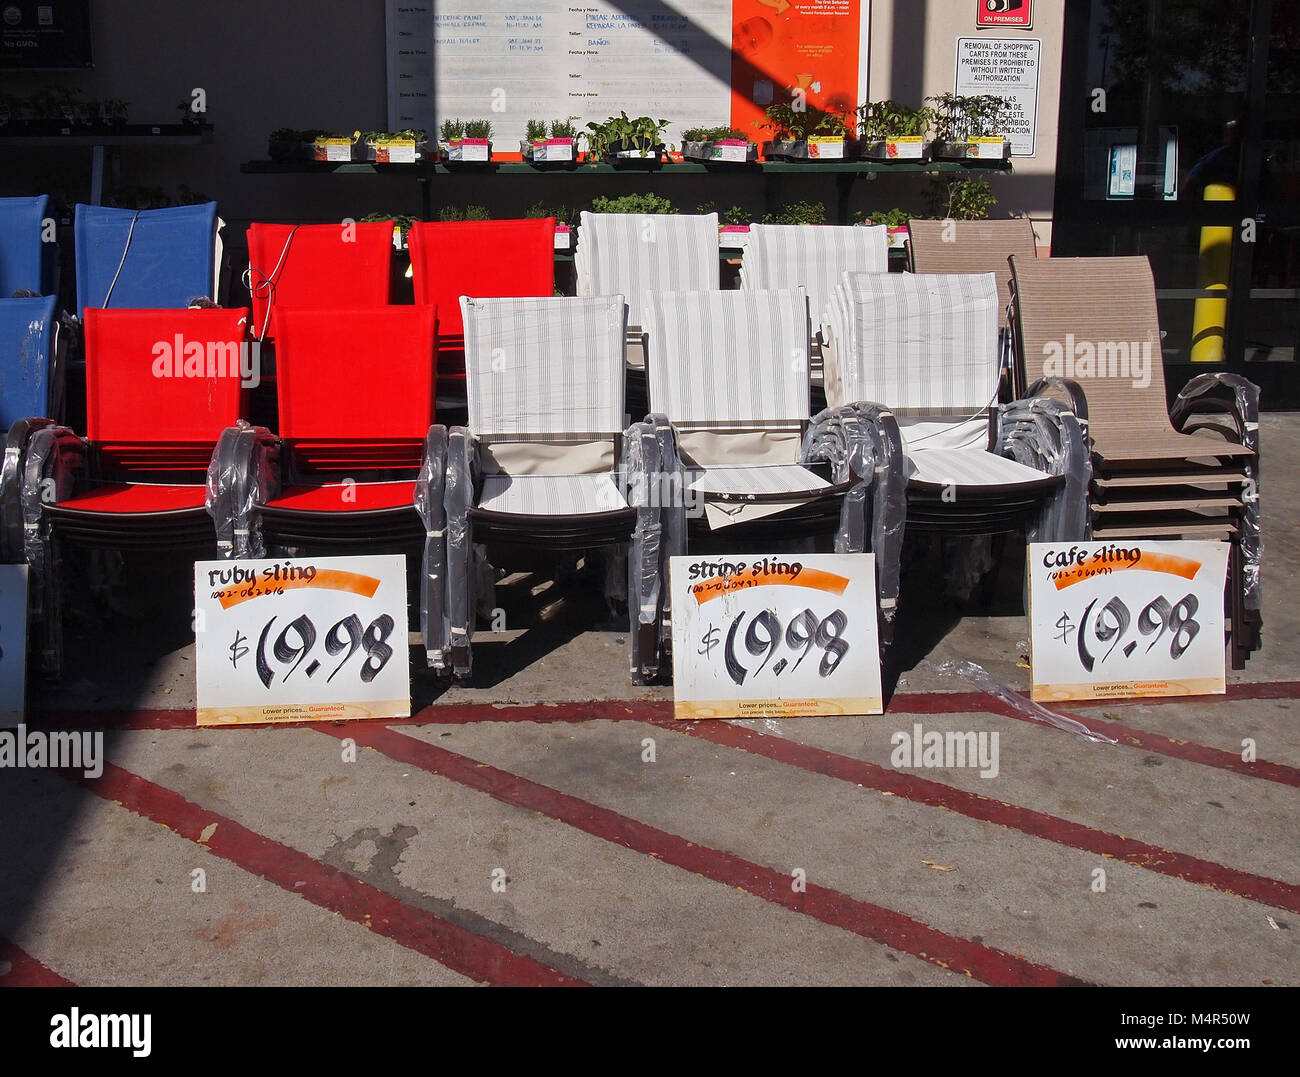 stacks of lawn chairs for sale at home depot store